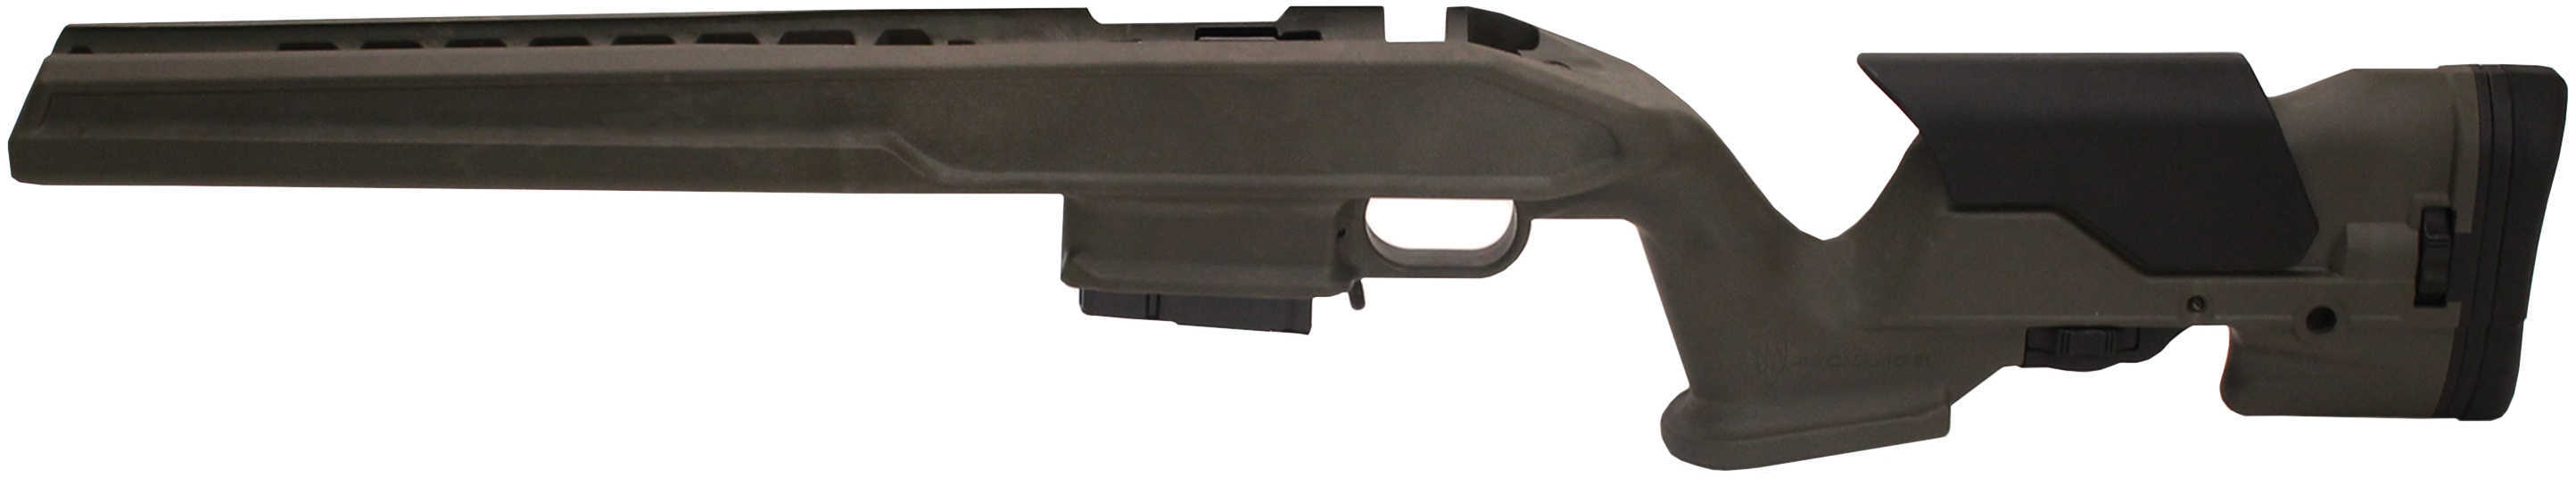 ProMag Archangel 700 Precision Stock Olive Drab Md: AA700A-OD